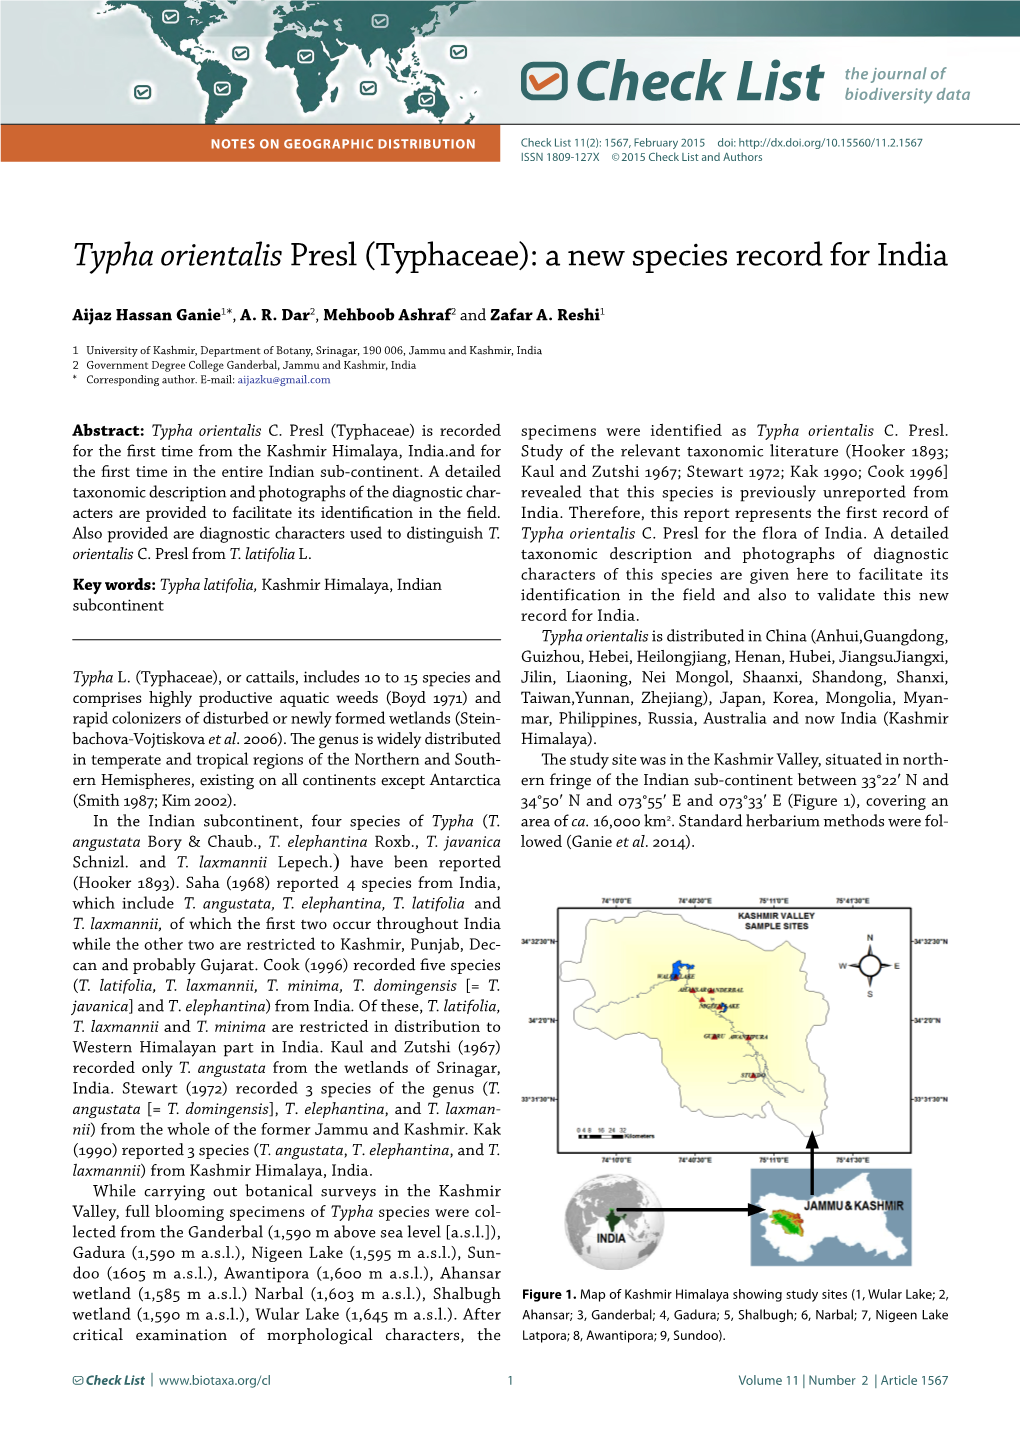 Typha Orientalis Presl (Typhaceae): a New Species Record for India